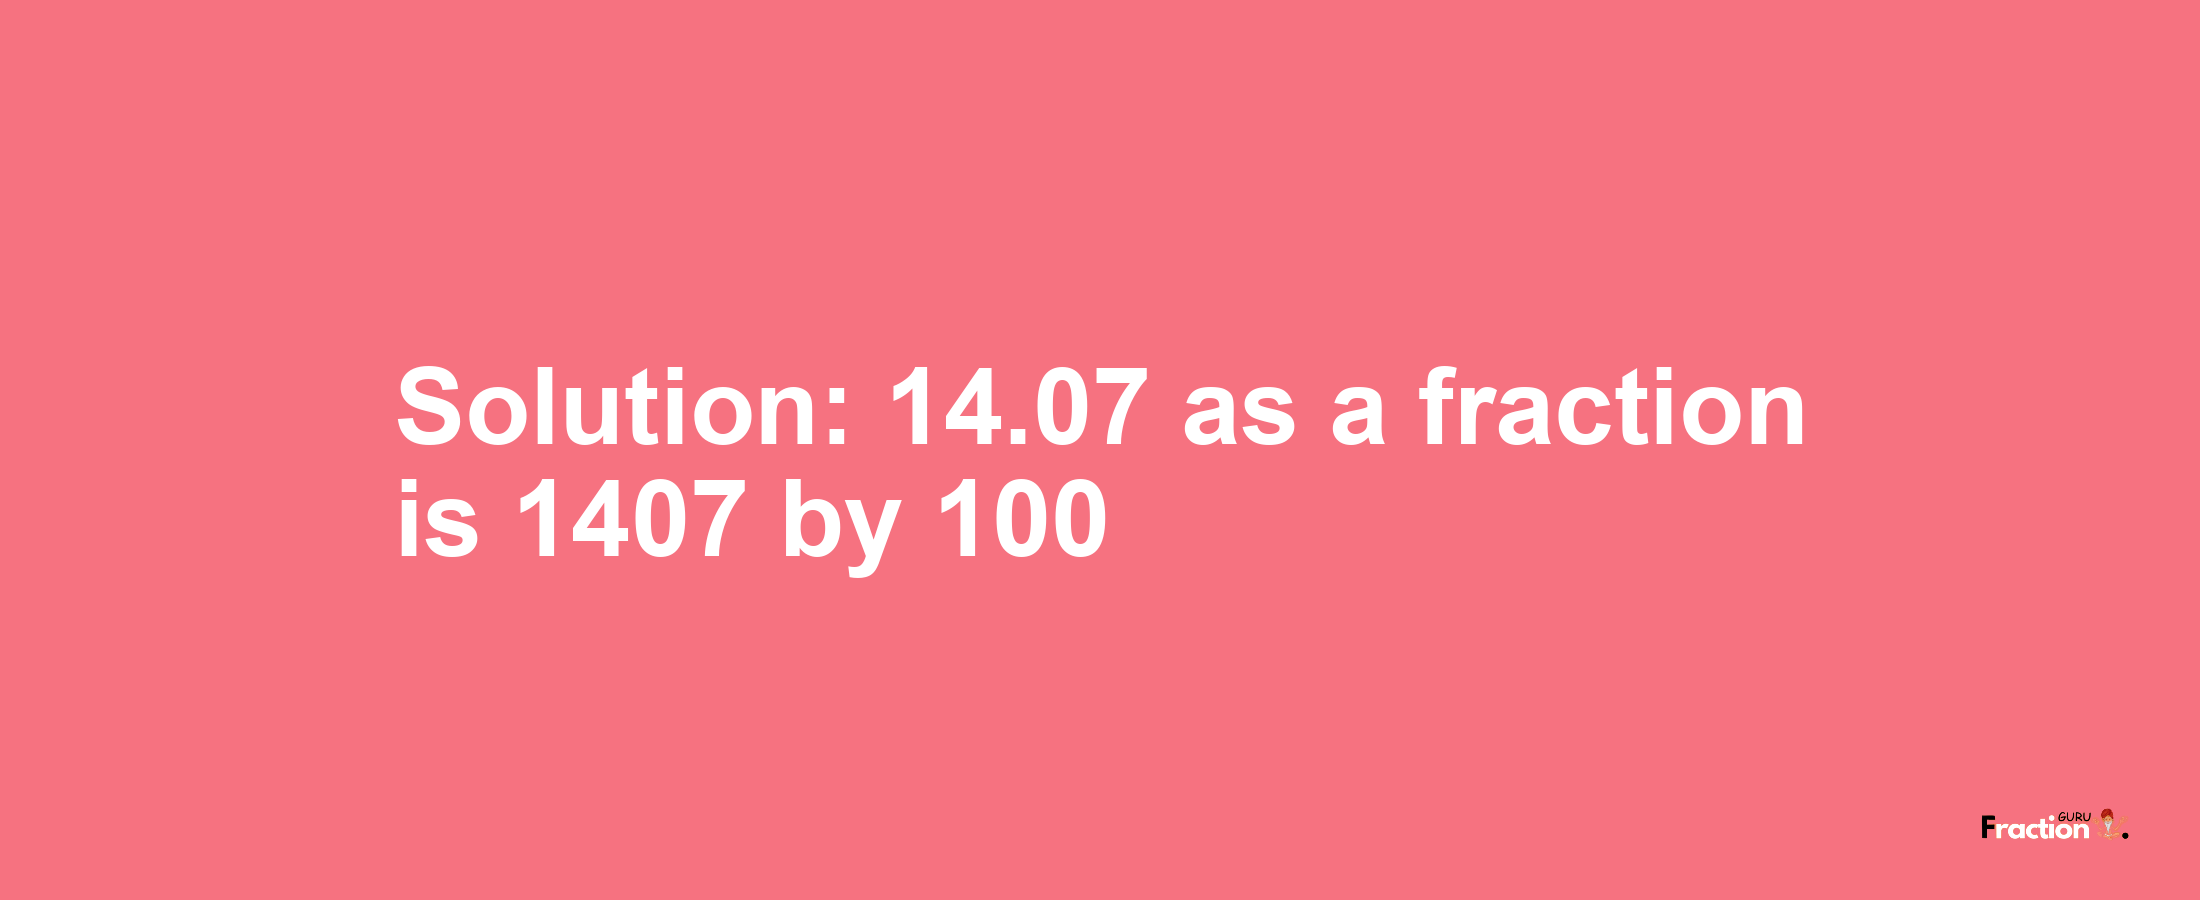 Solution:14.07 as a fraction is 1407/100